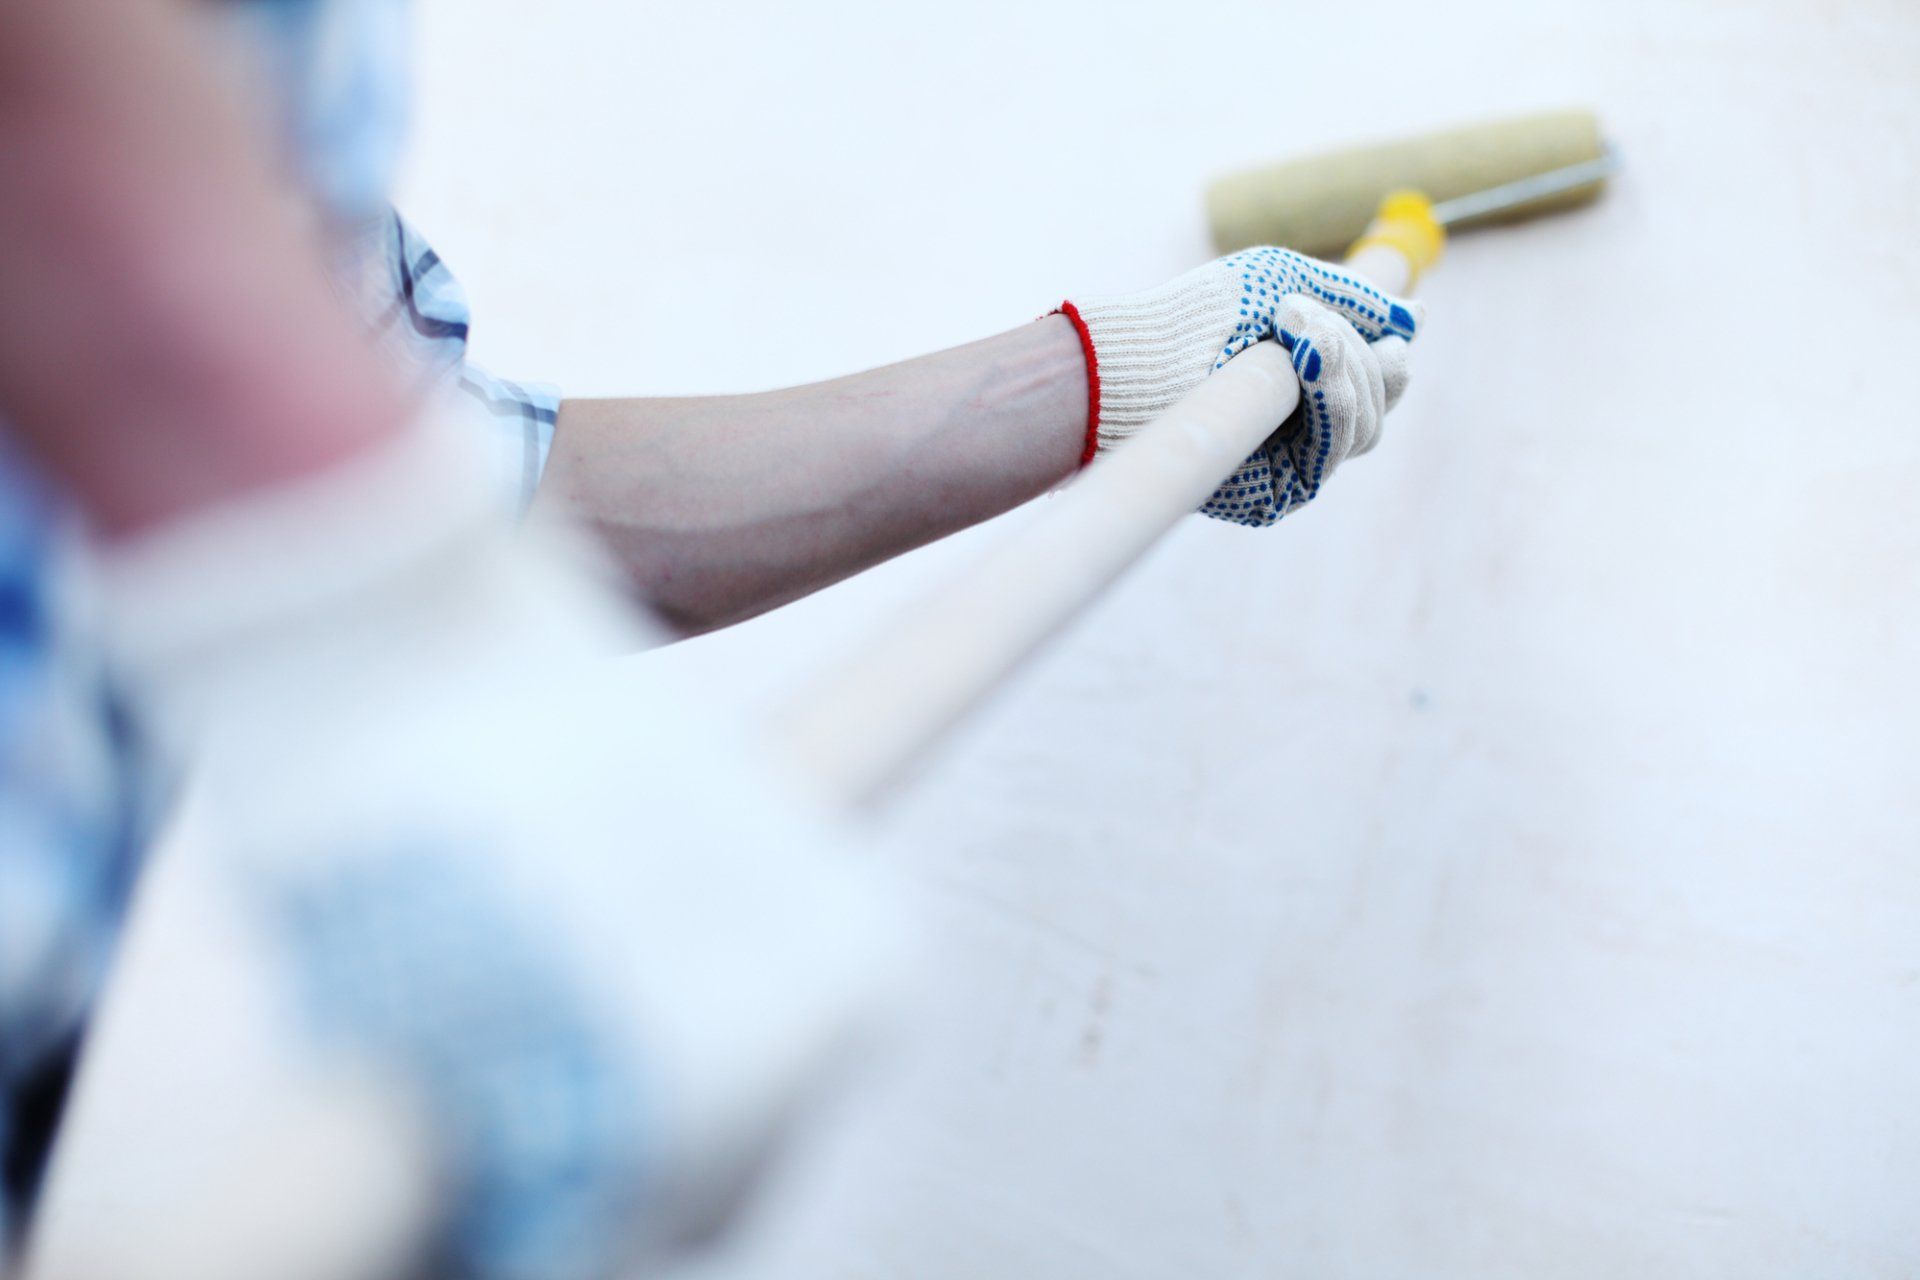 Painting Service in Anchorage, AK